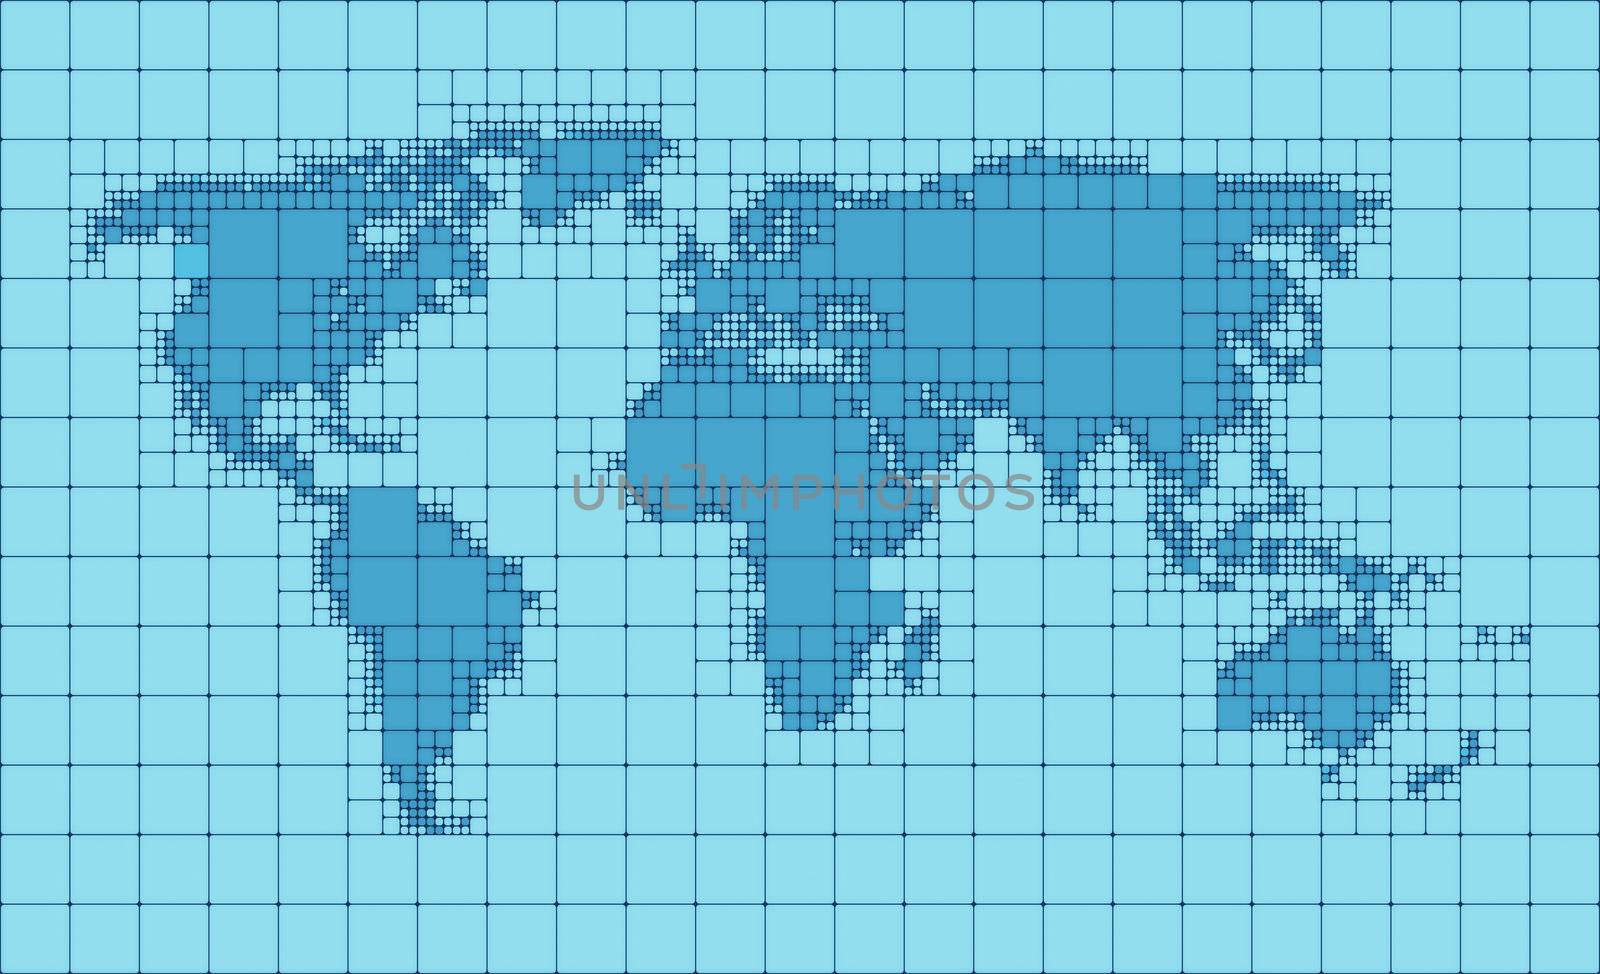 An illustration of a stylized blue earth map